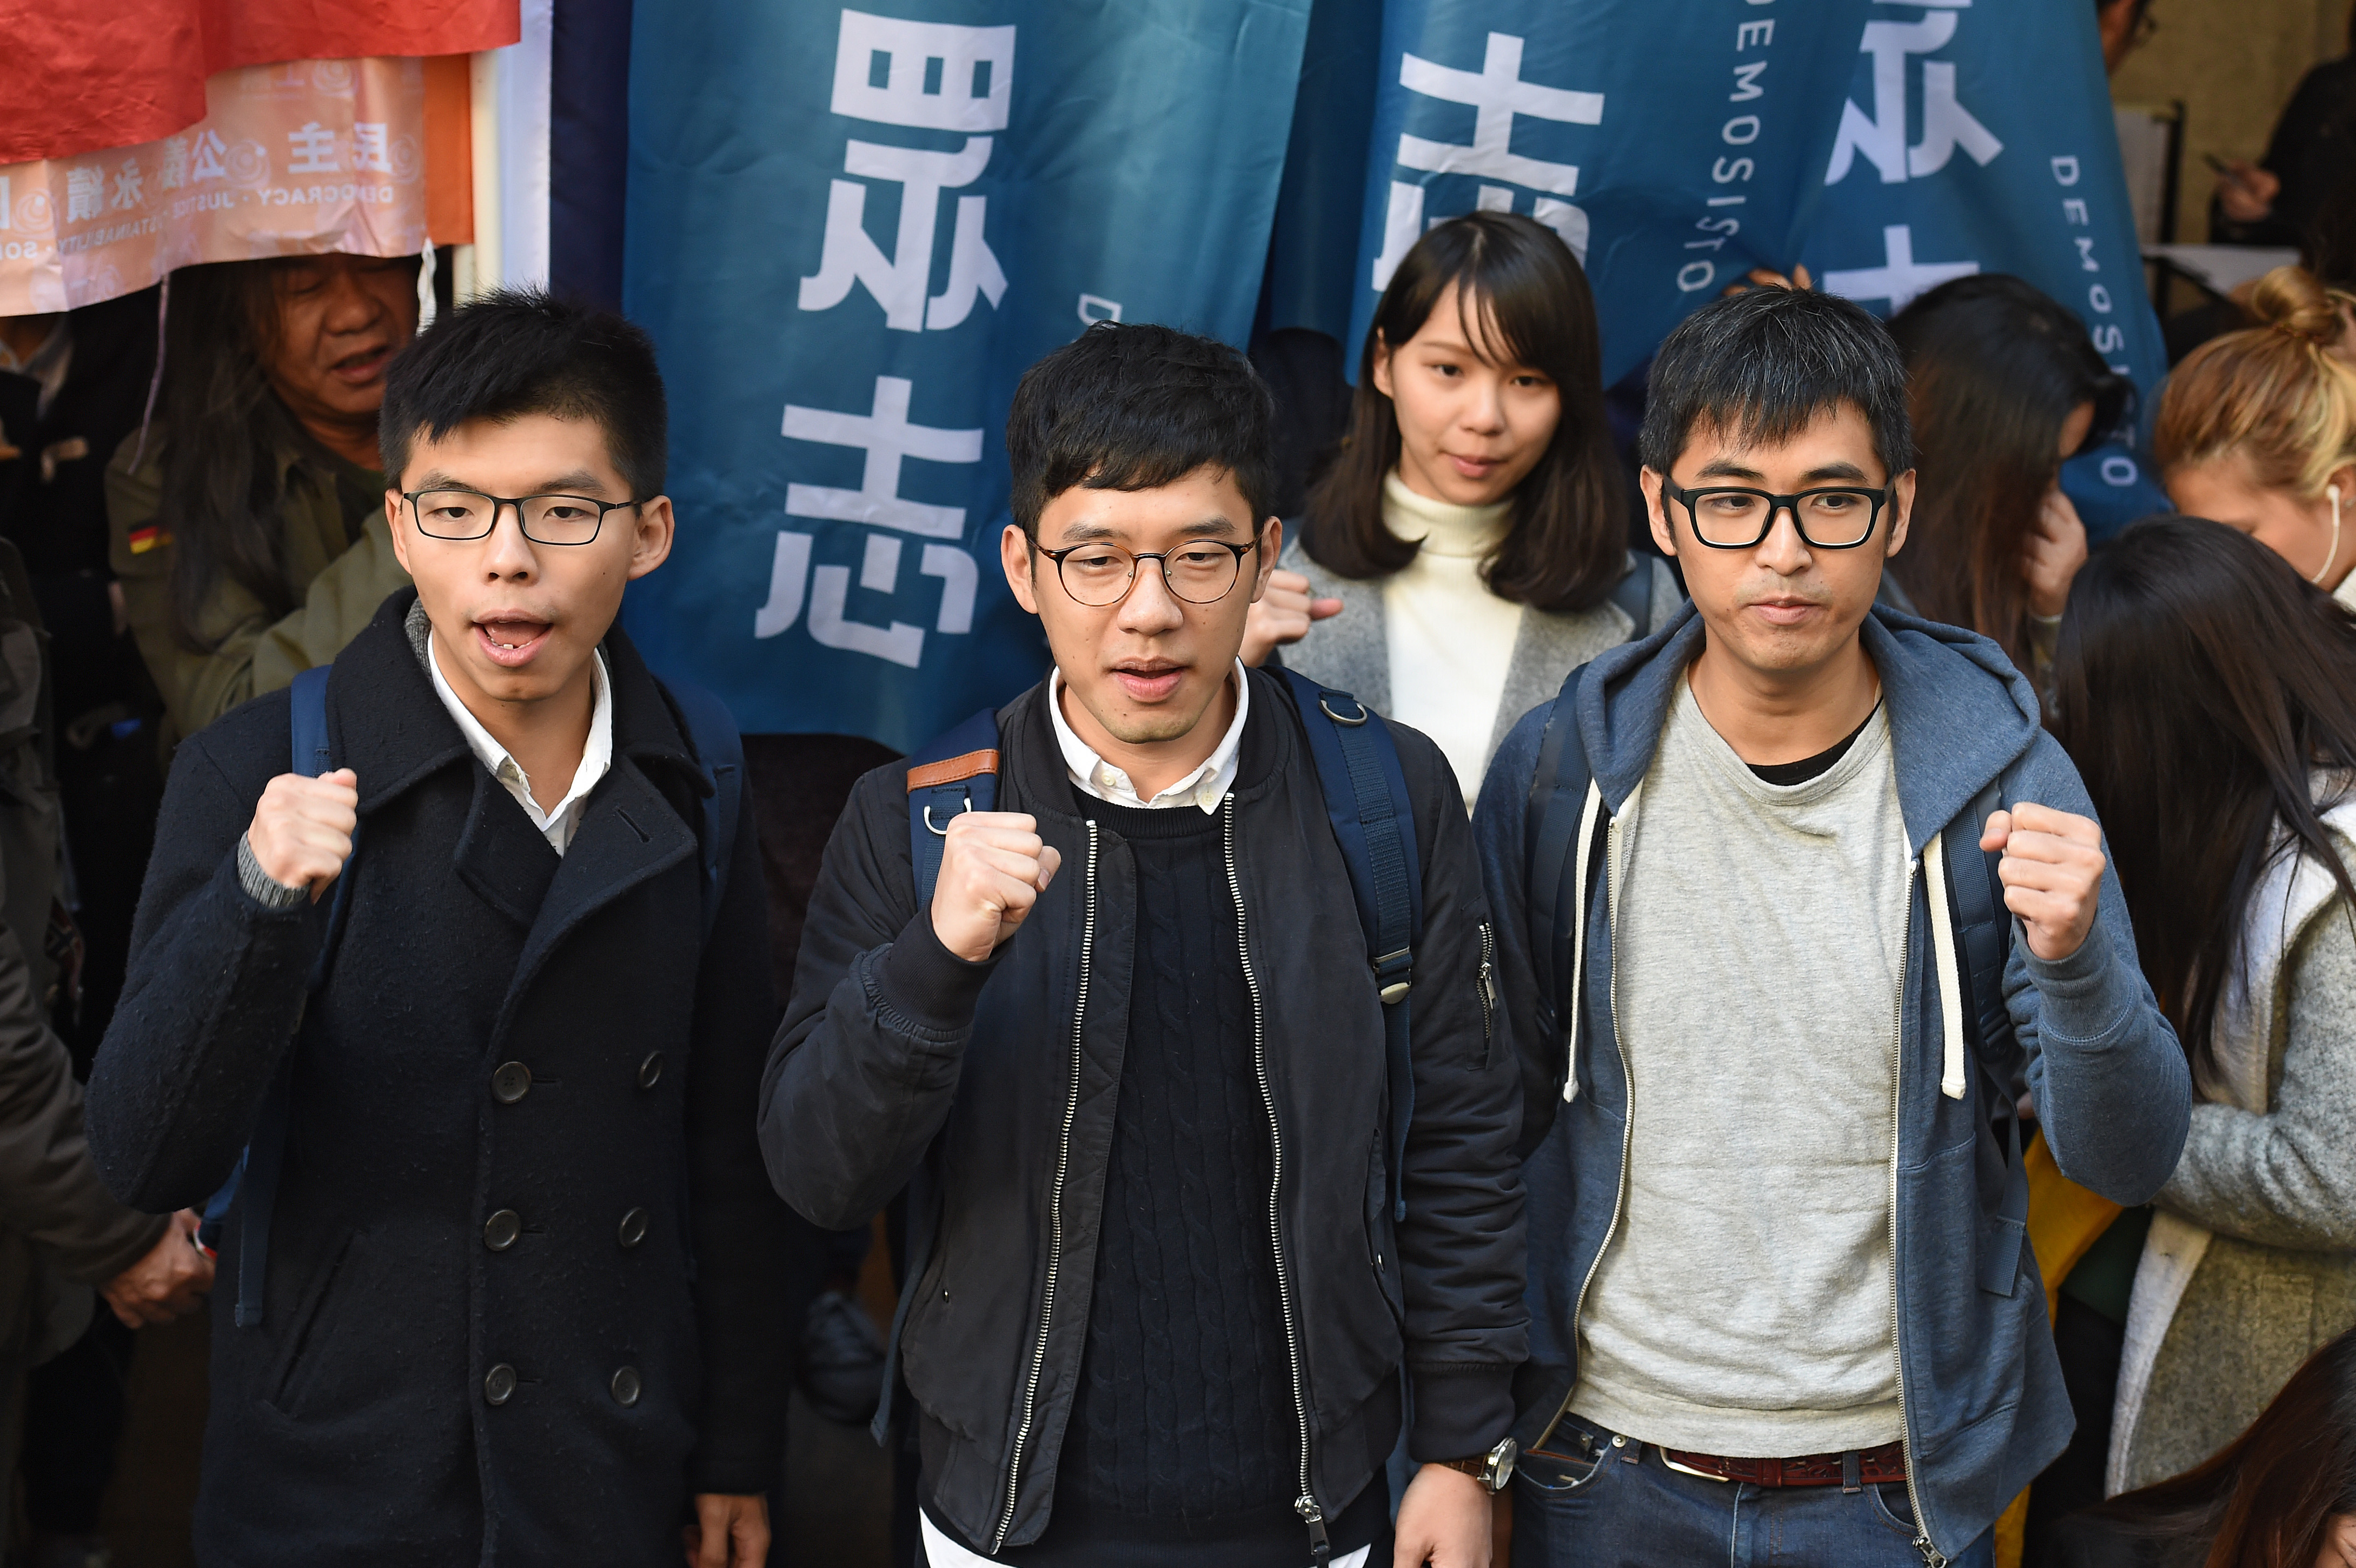 Hong Kong democracy activists Joshua Wong, Nathan Law and Alex Chow outside Hong Kong's Court of Final Appeal before a hearing on Jan. 16, 2018. (Anthony Wallace—AFP/Getty Images)